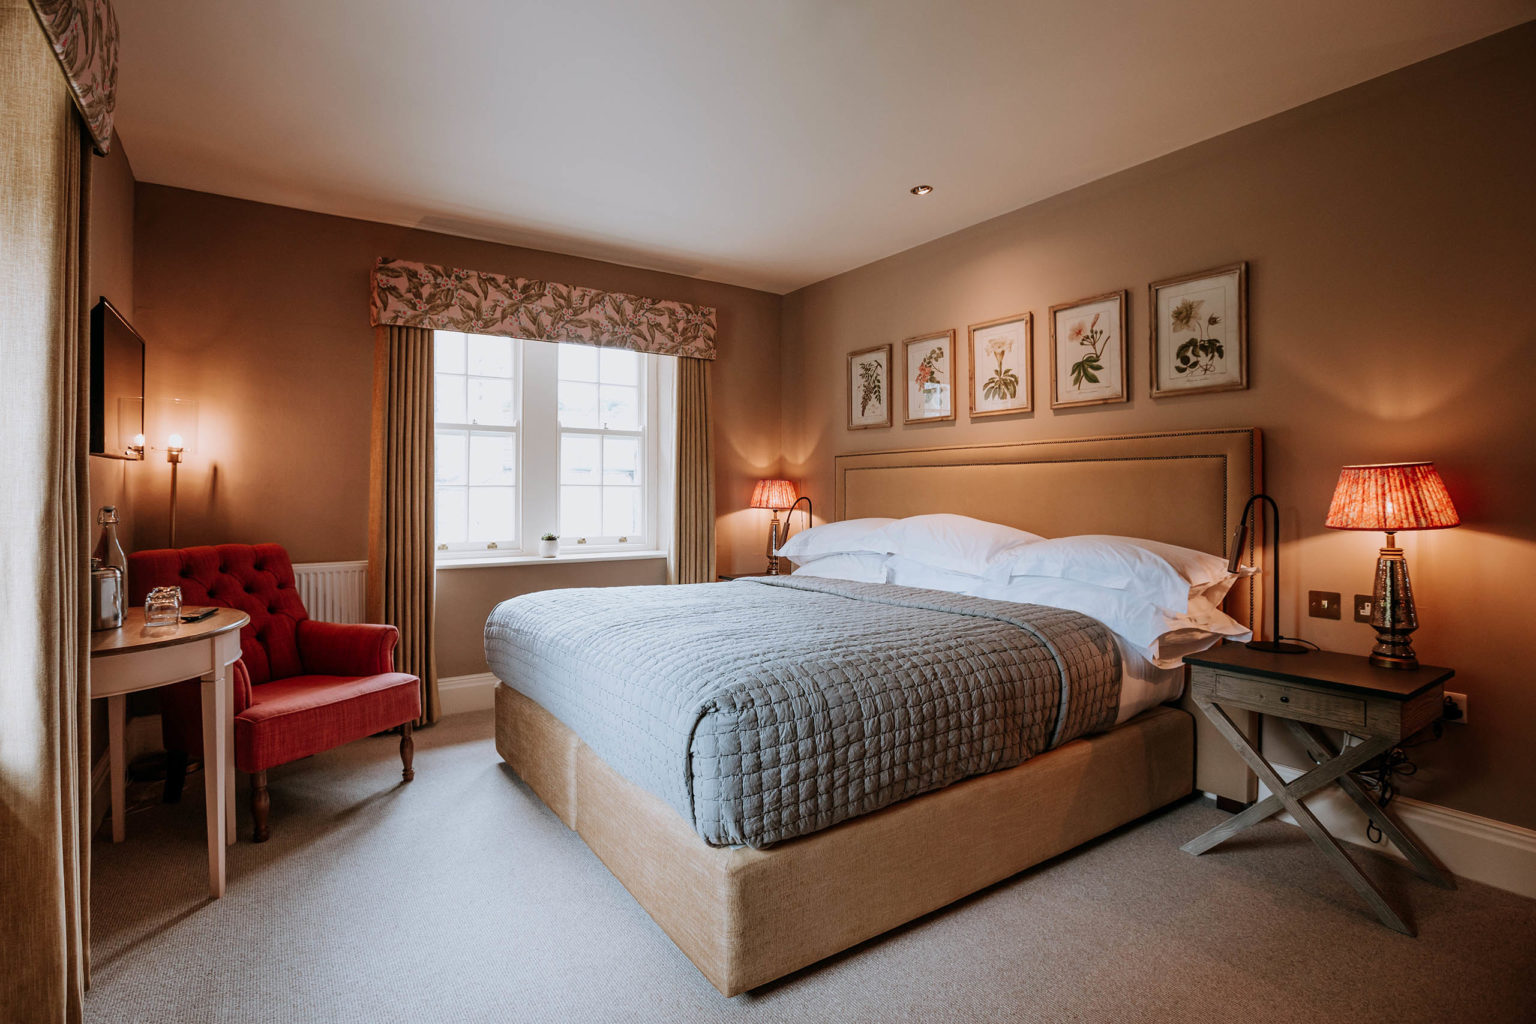 A wide angle photo of Healey bedroom at Swinton Park Hotel in North Yorkshire